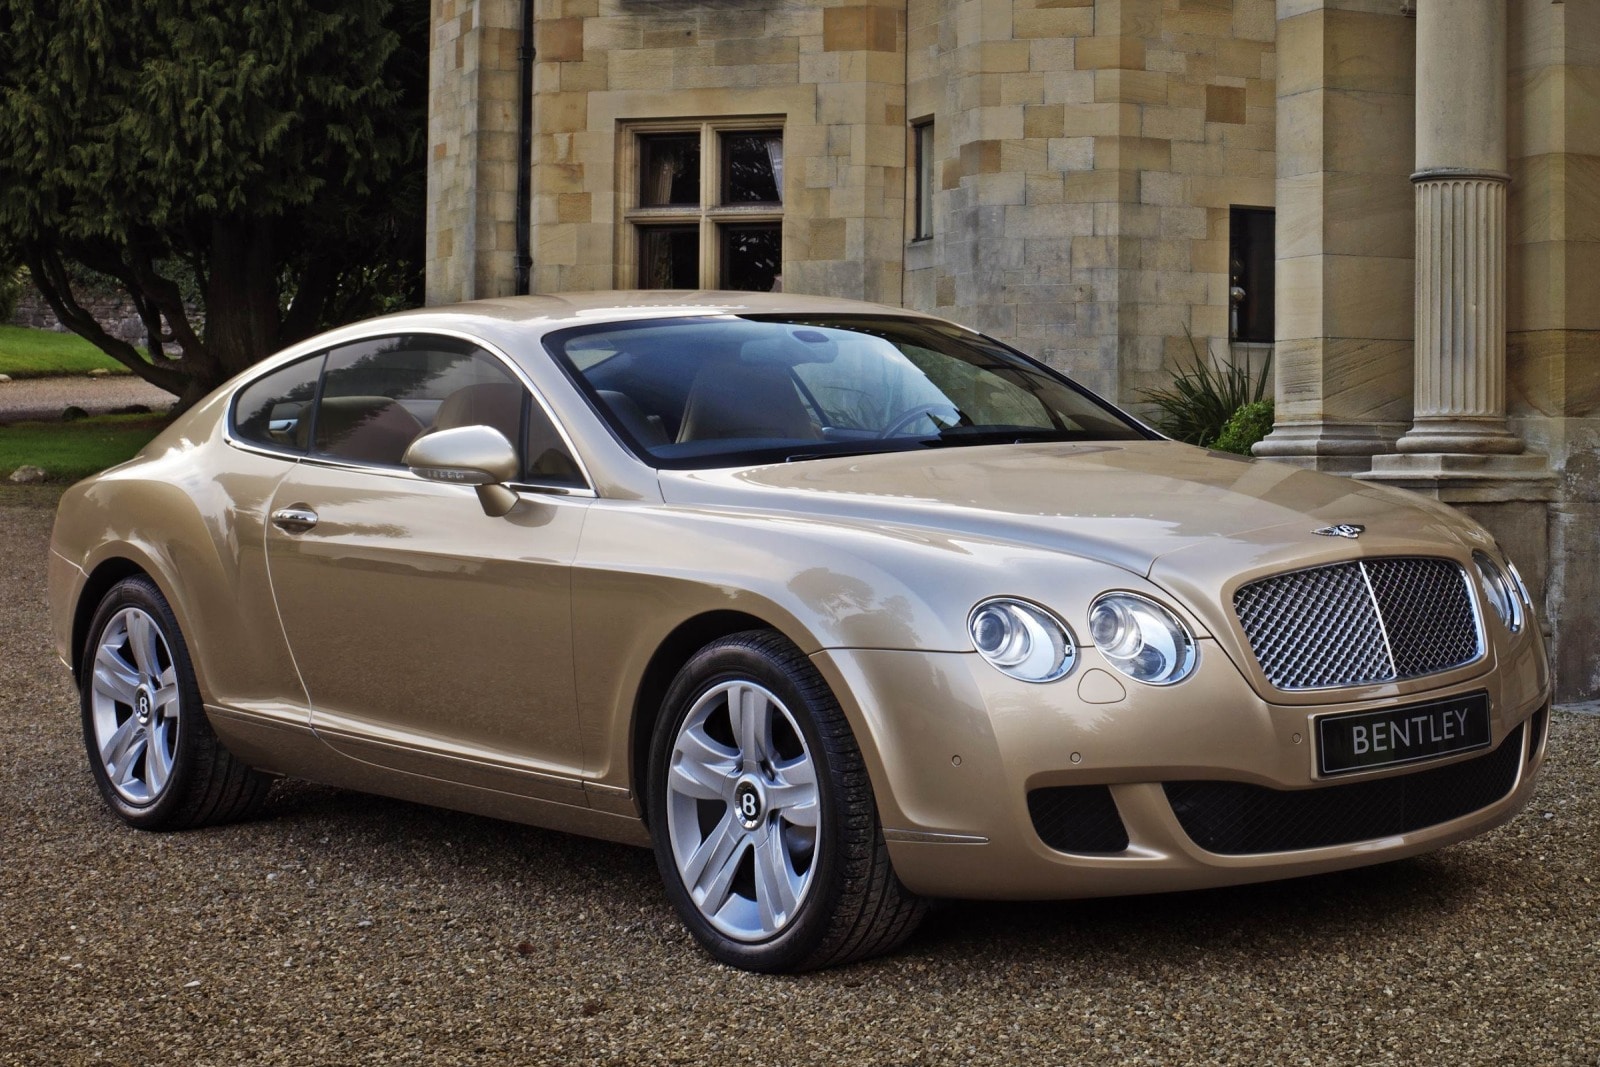 2010 Bentley Continental GT Review & Ratings | Edmunds